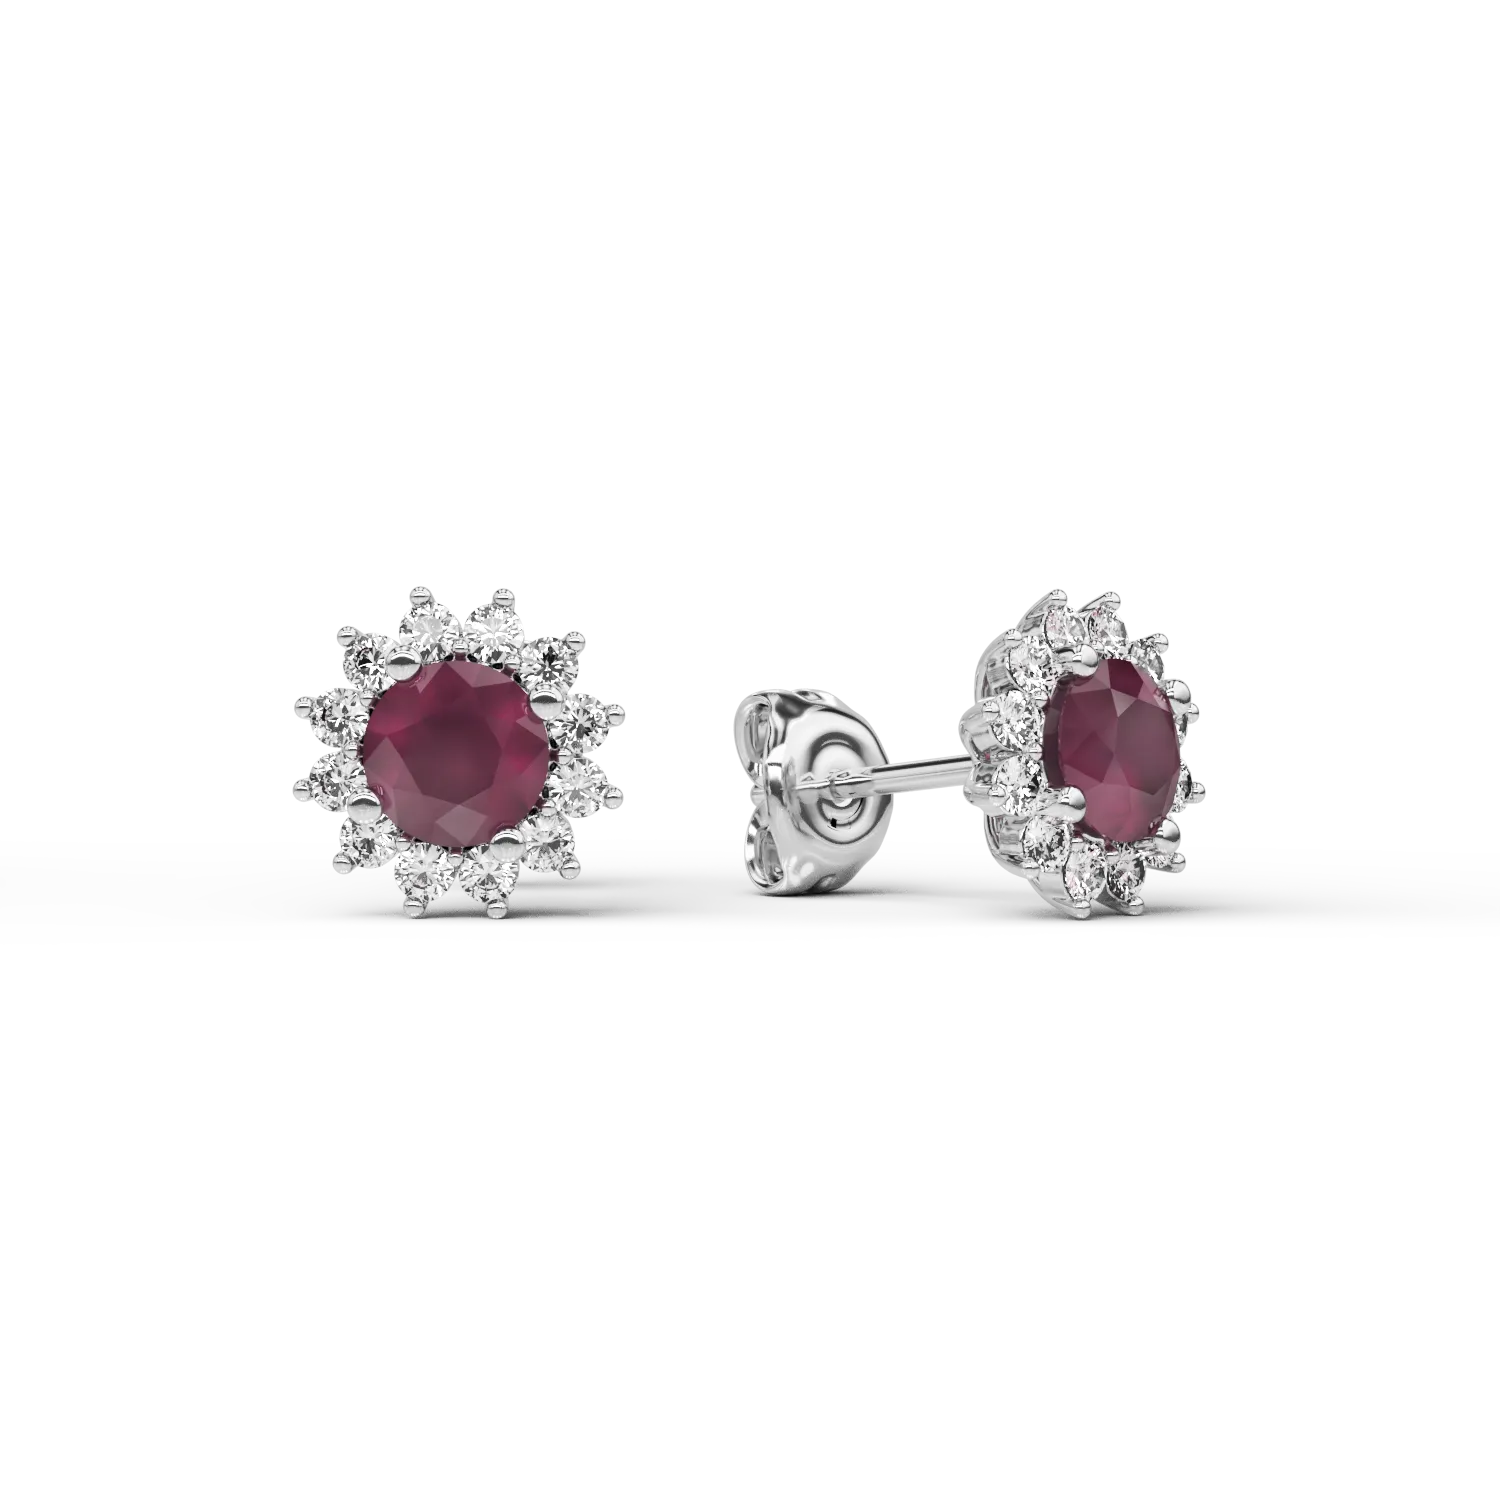 18K white gold earrings with 0.9ct rubines and 0.27ct diamonds